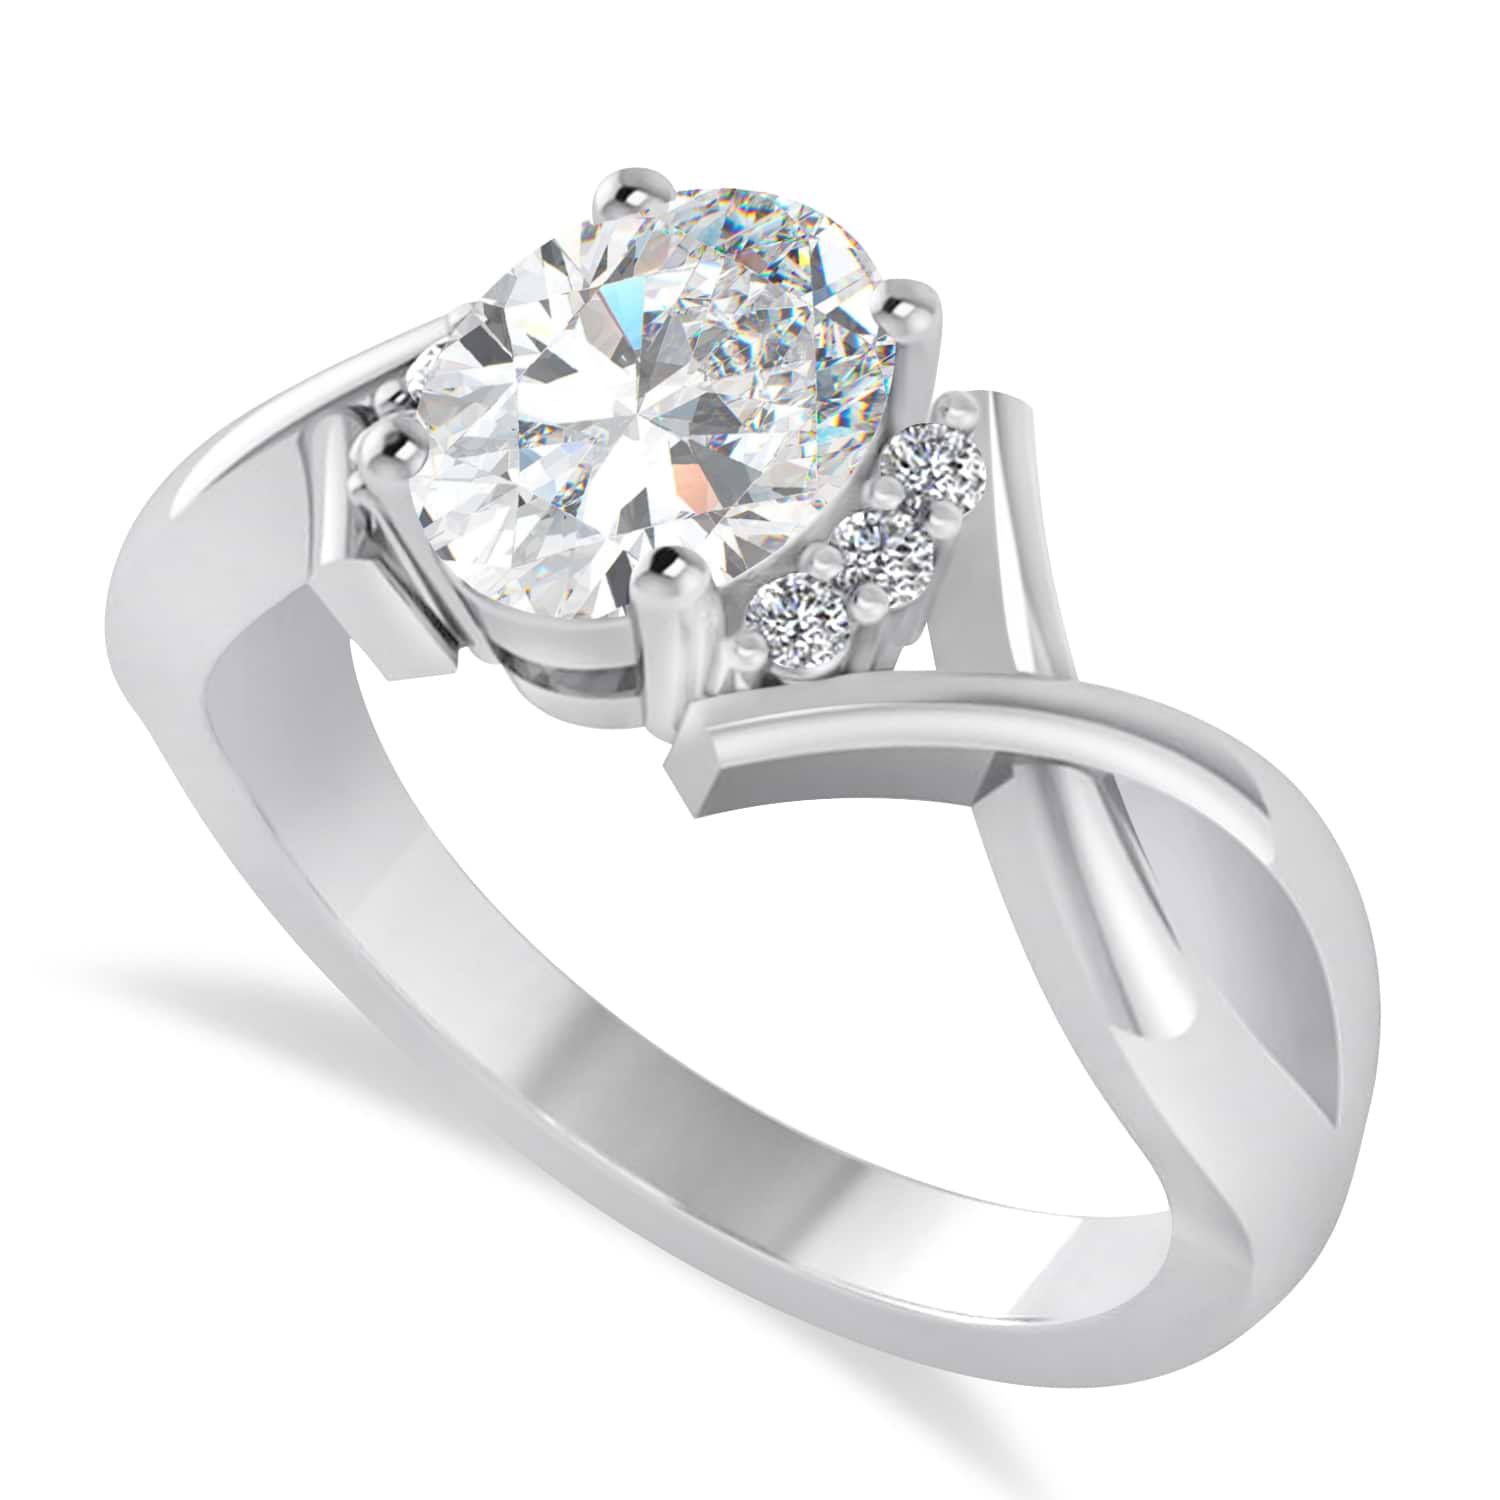 Oval Cut Diamond Engagement Ring With Split Shank 14k White Gold (1.59 ct)